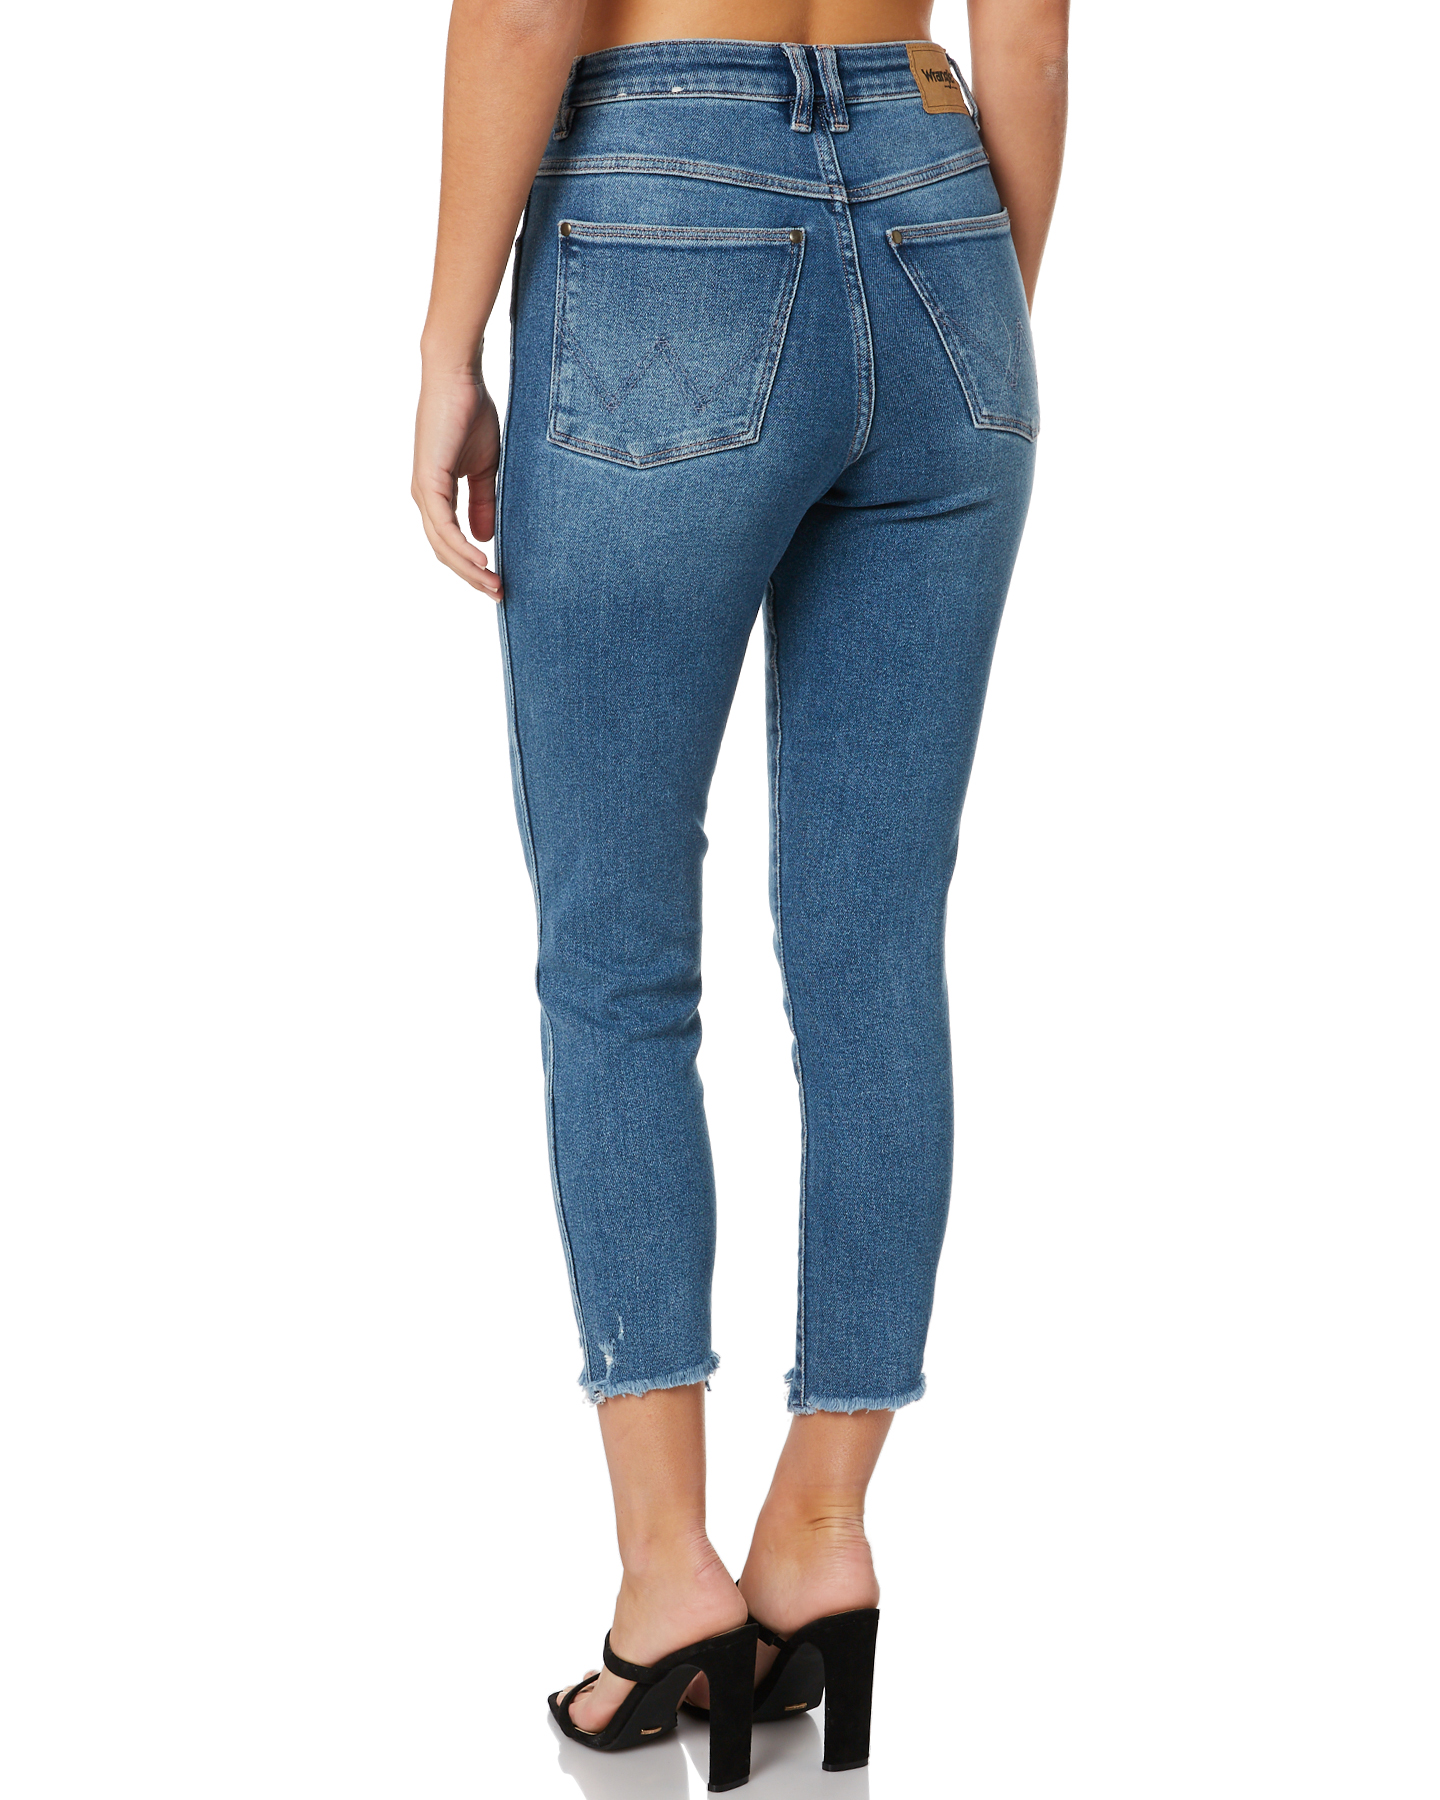 Wrangler Tyler Cropped Jean - Silver Lining Blue | SurfStitch